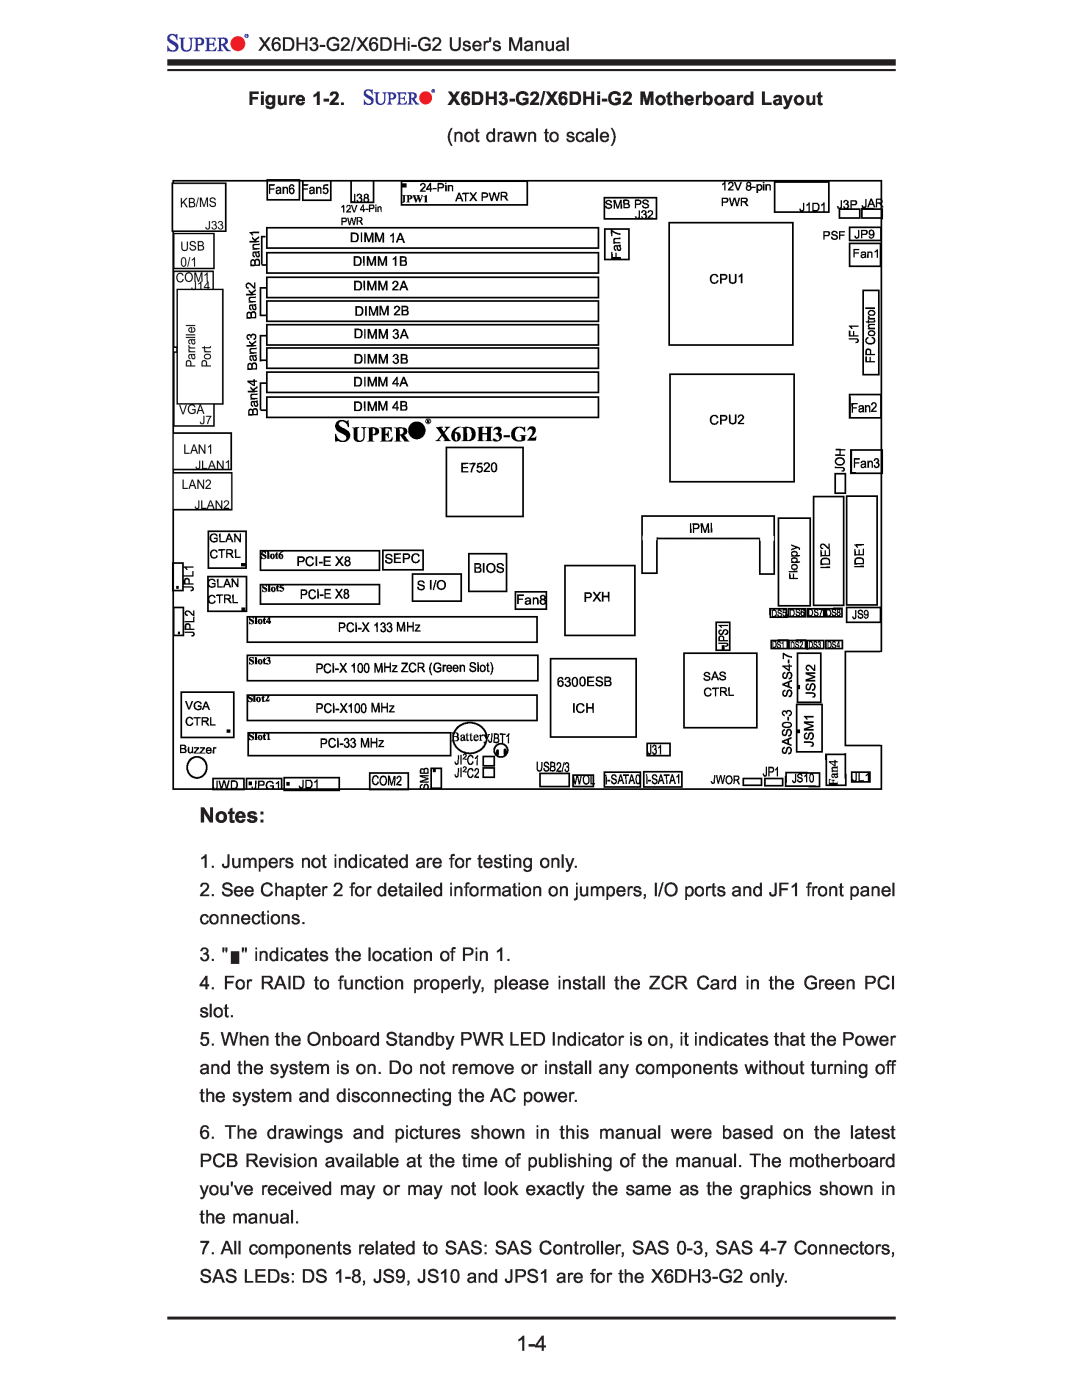 SUPER MICRO Computer user manual Super, 2. X6DH3-G2/X6DHi-G2 Motherboard Layout 